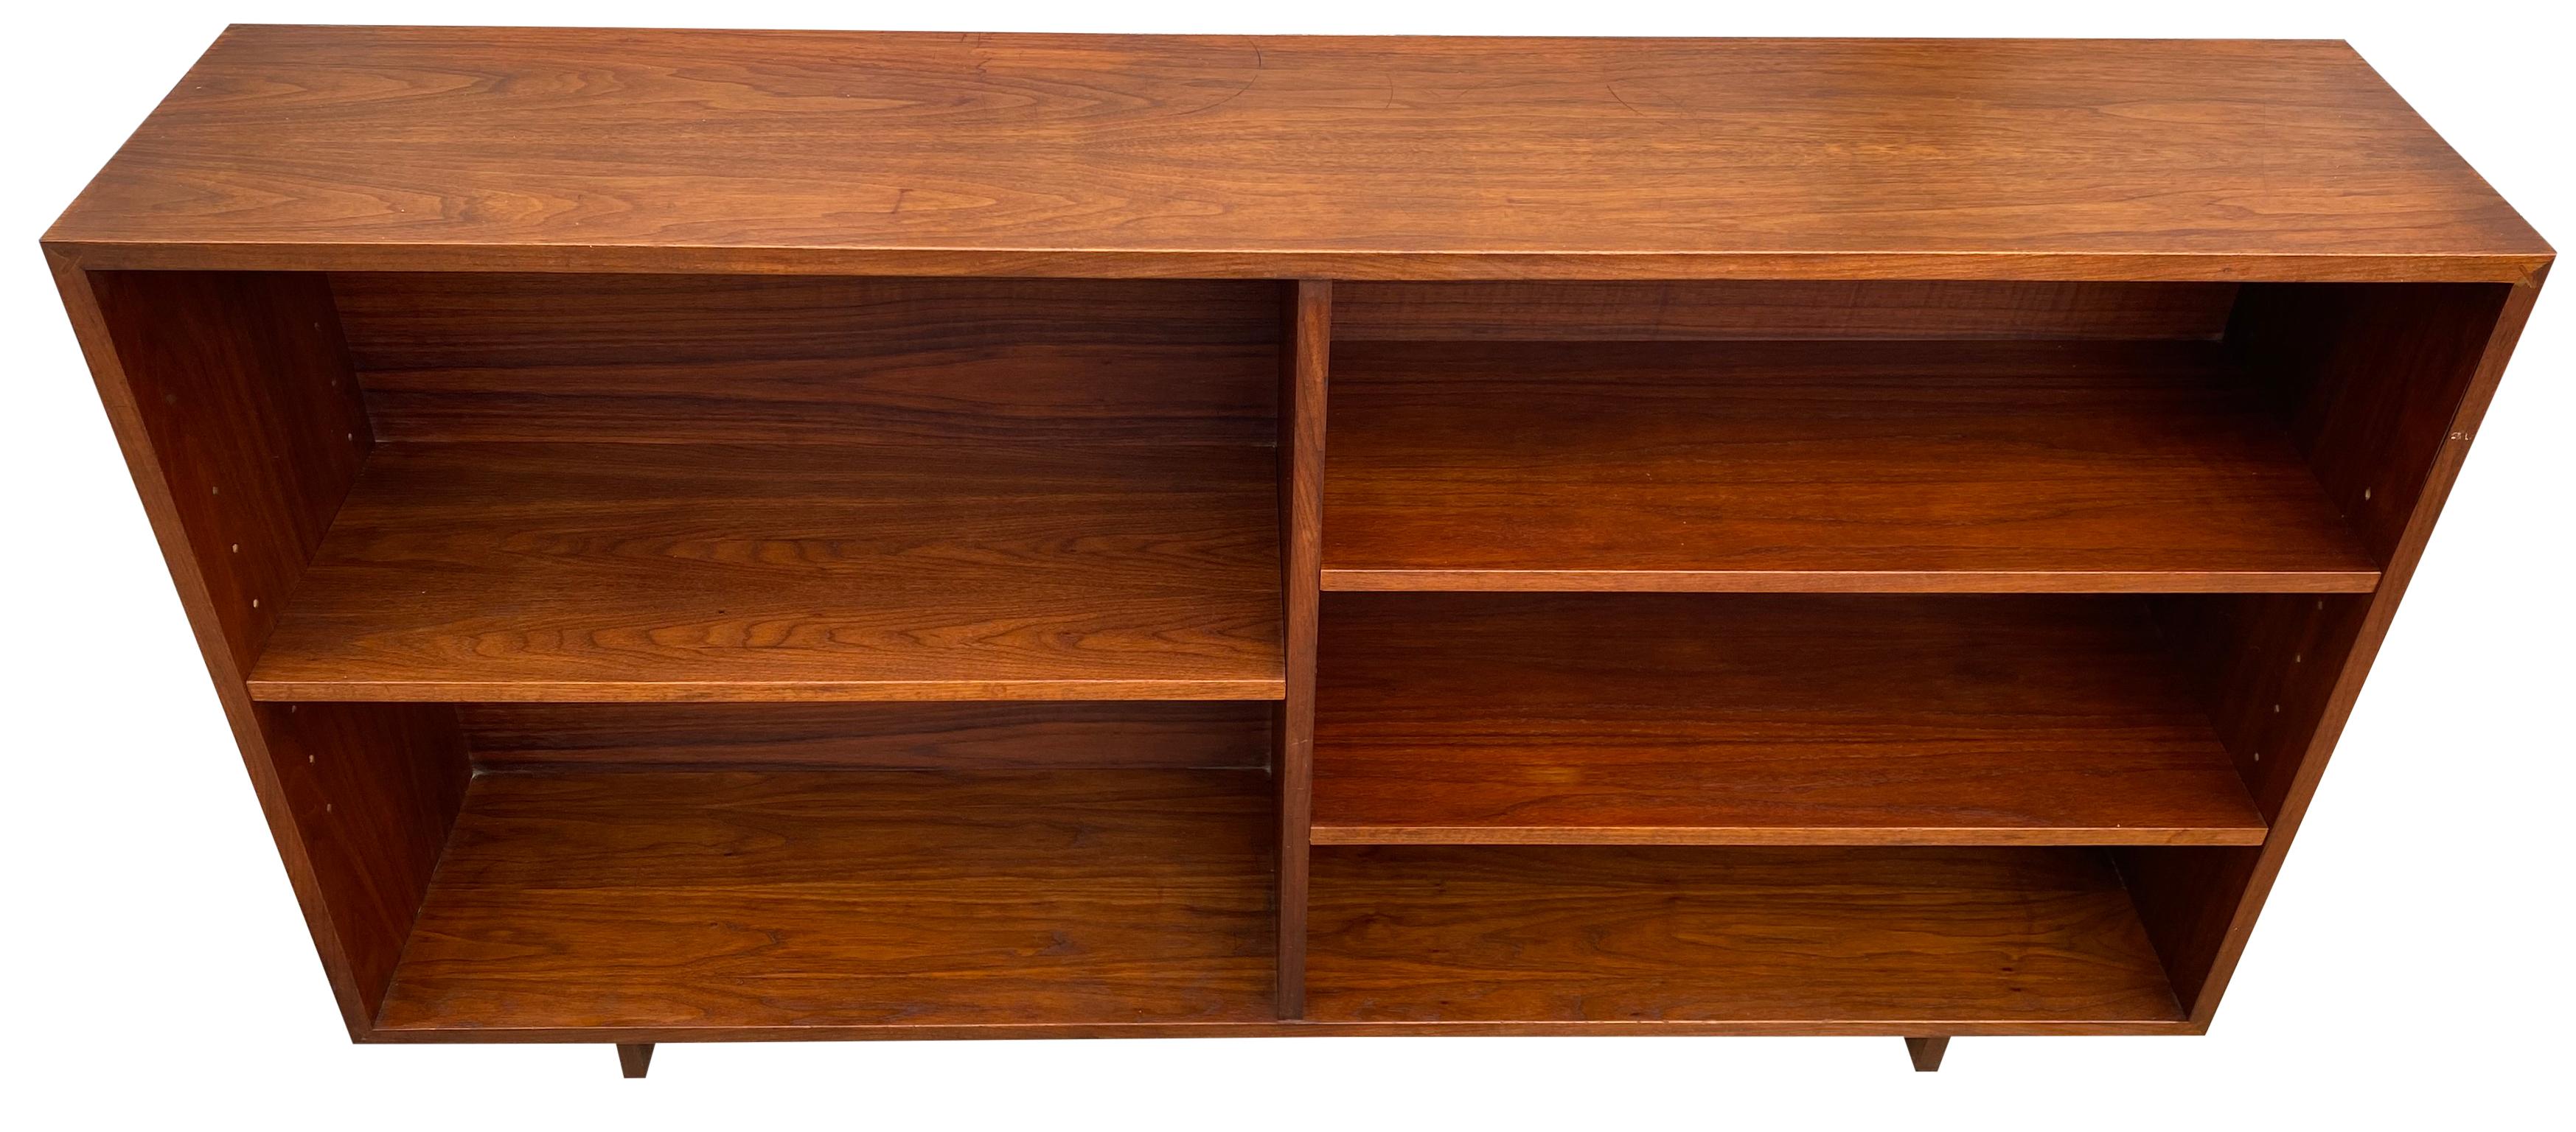 Vintage Mid-Century Modern in the style of George Nakashima low single bookcase walnut American Studio craft. Beautiful bookcase custom made walnut bookcase, 3 adjustable shelves on pins, Black Walnut construction and backing bookcase with short